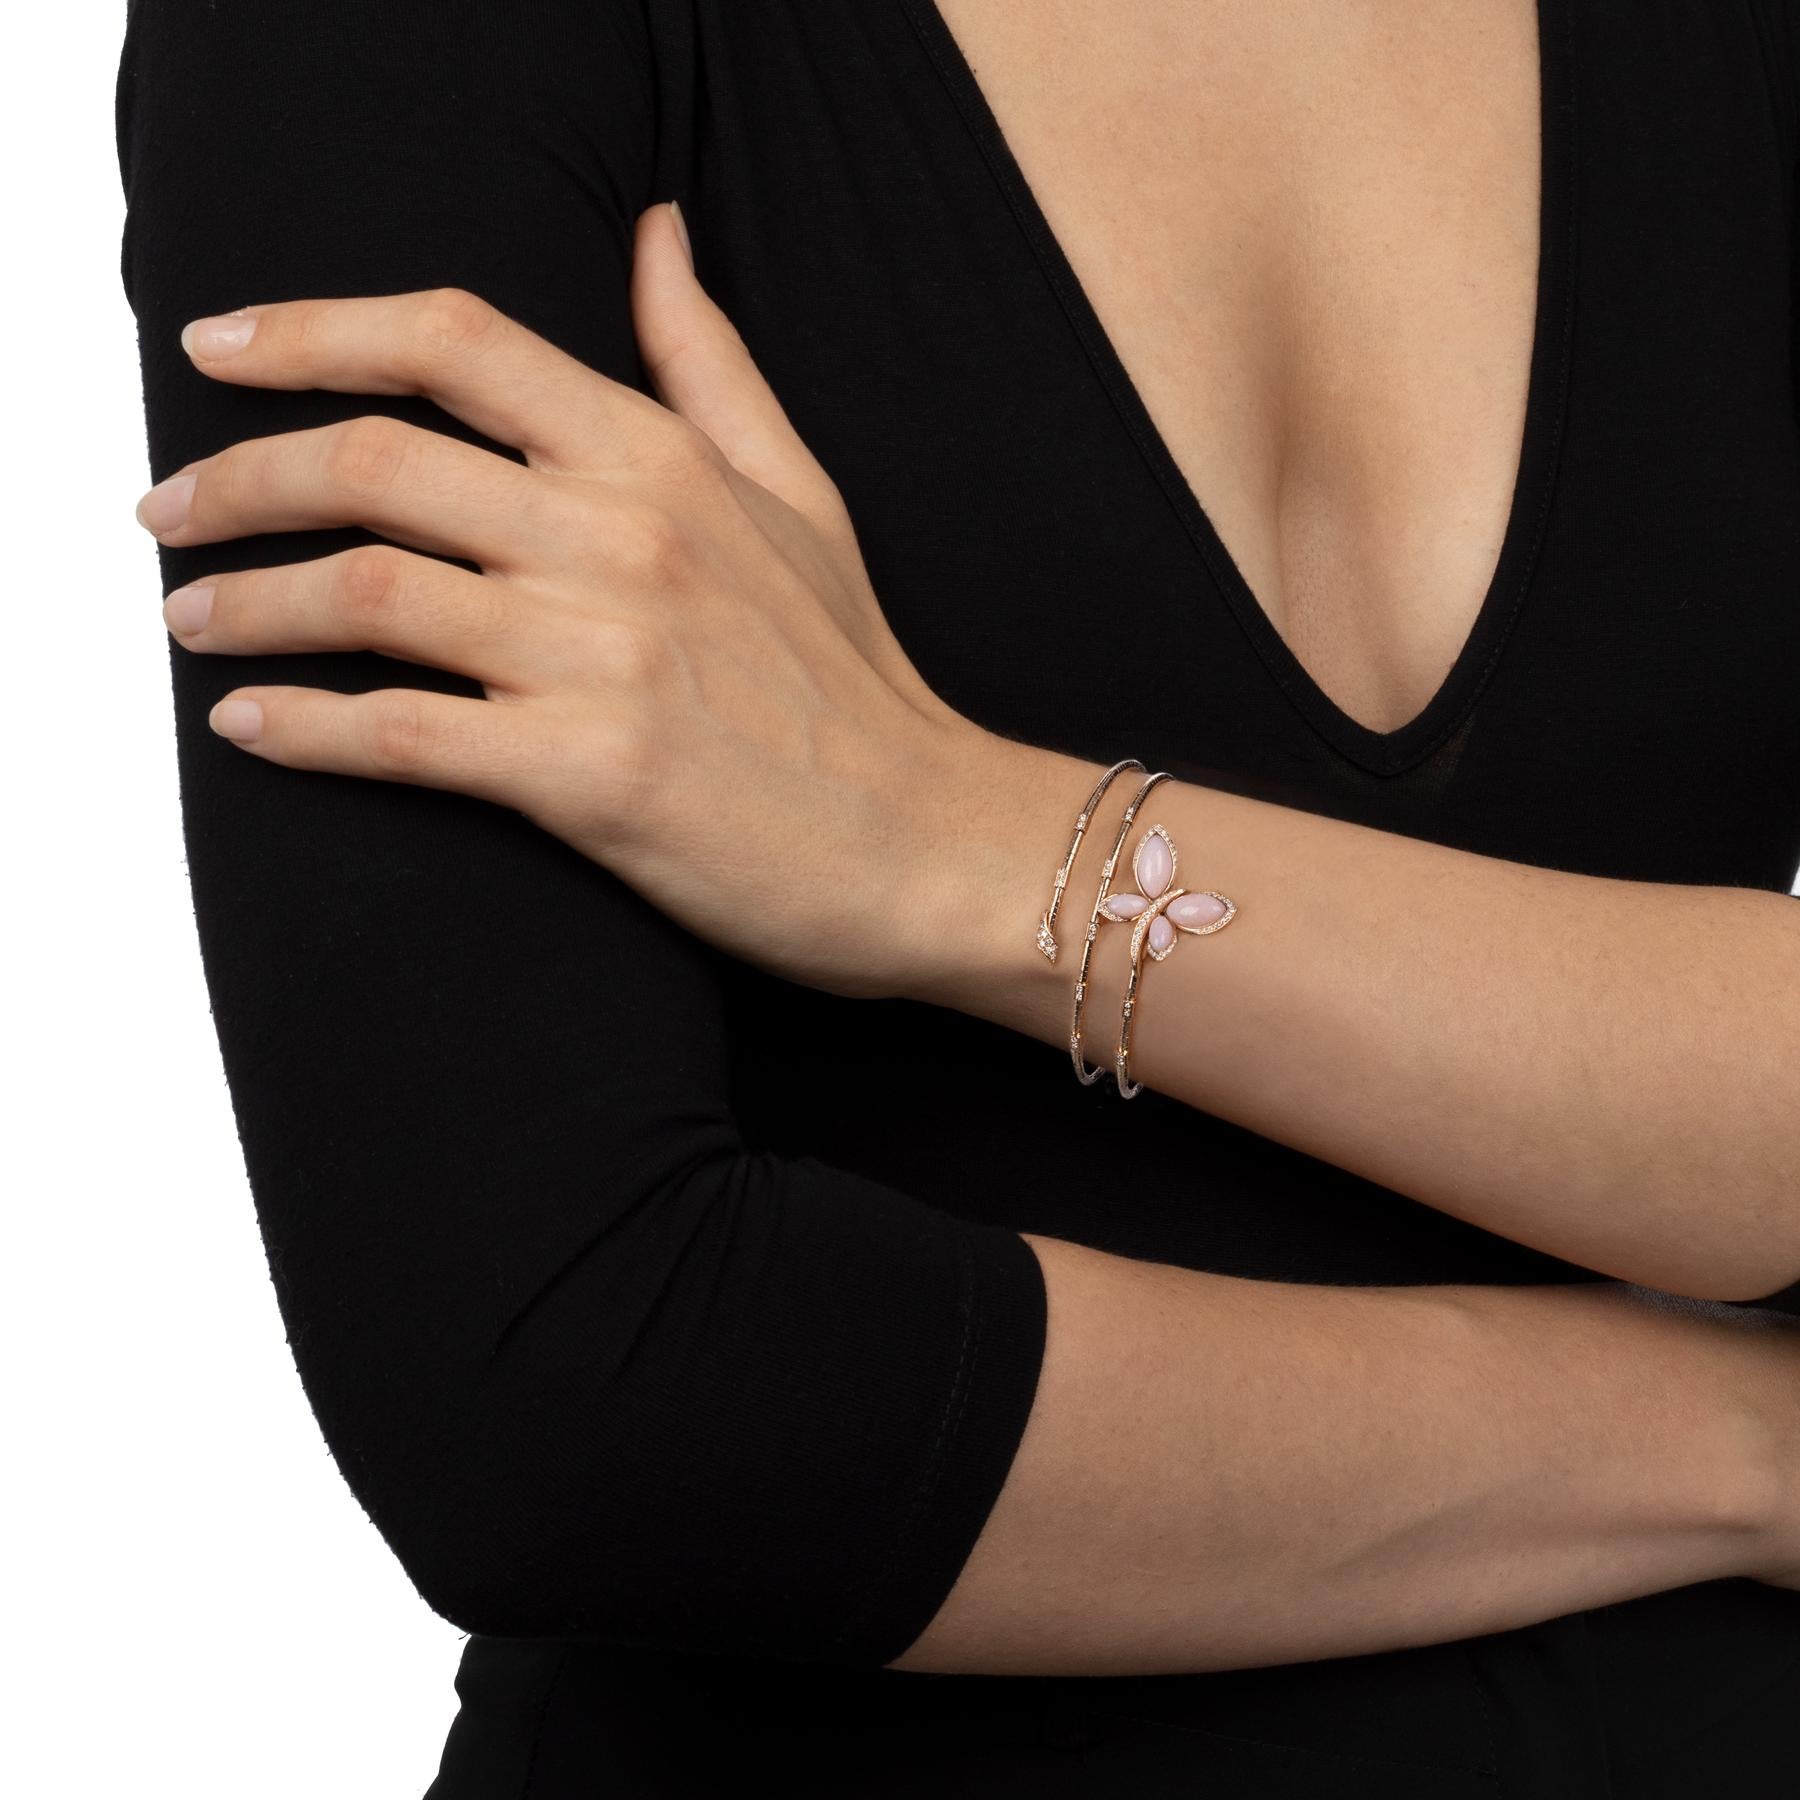 The beauty of this flexible spiral-shaped titanium core bracelet elegantly wrapped around the wrist, while the sparkling diamonds and pink opal butterfly add a touch of glamor. A strong statement of style and a perfect example of traditional Italian